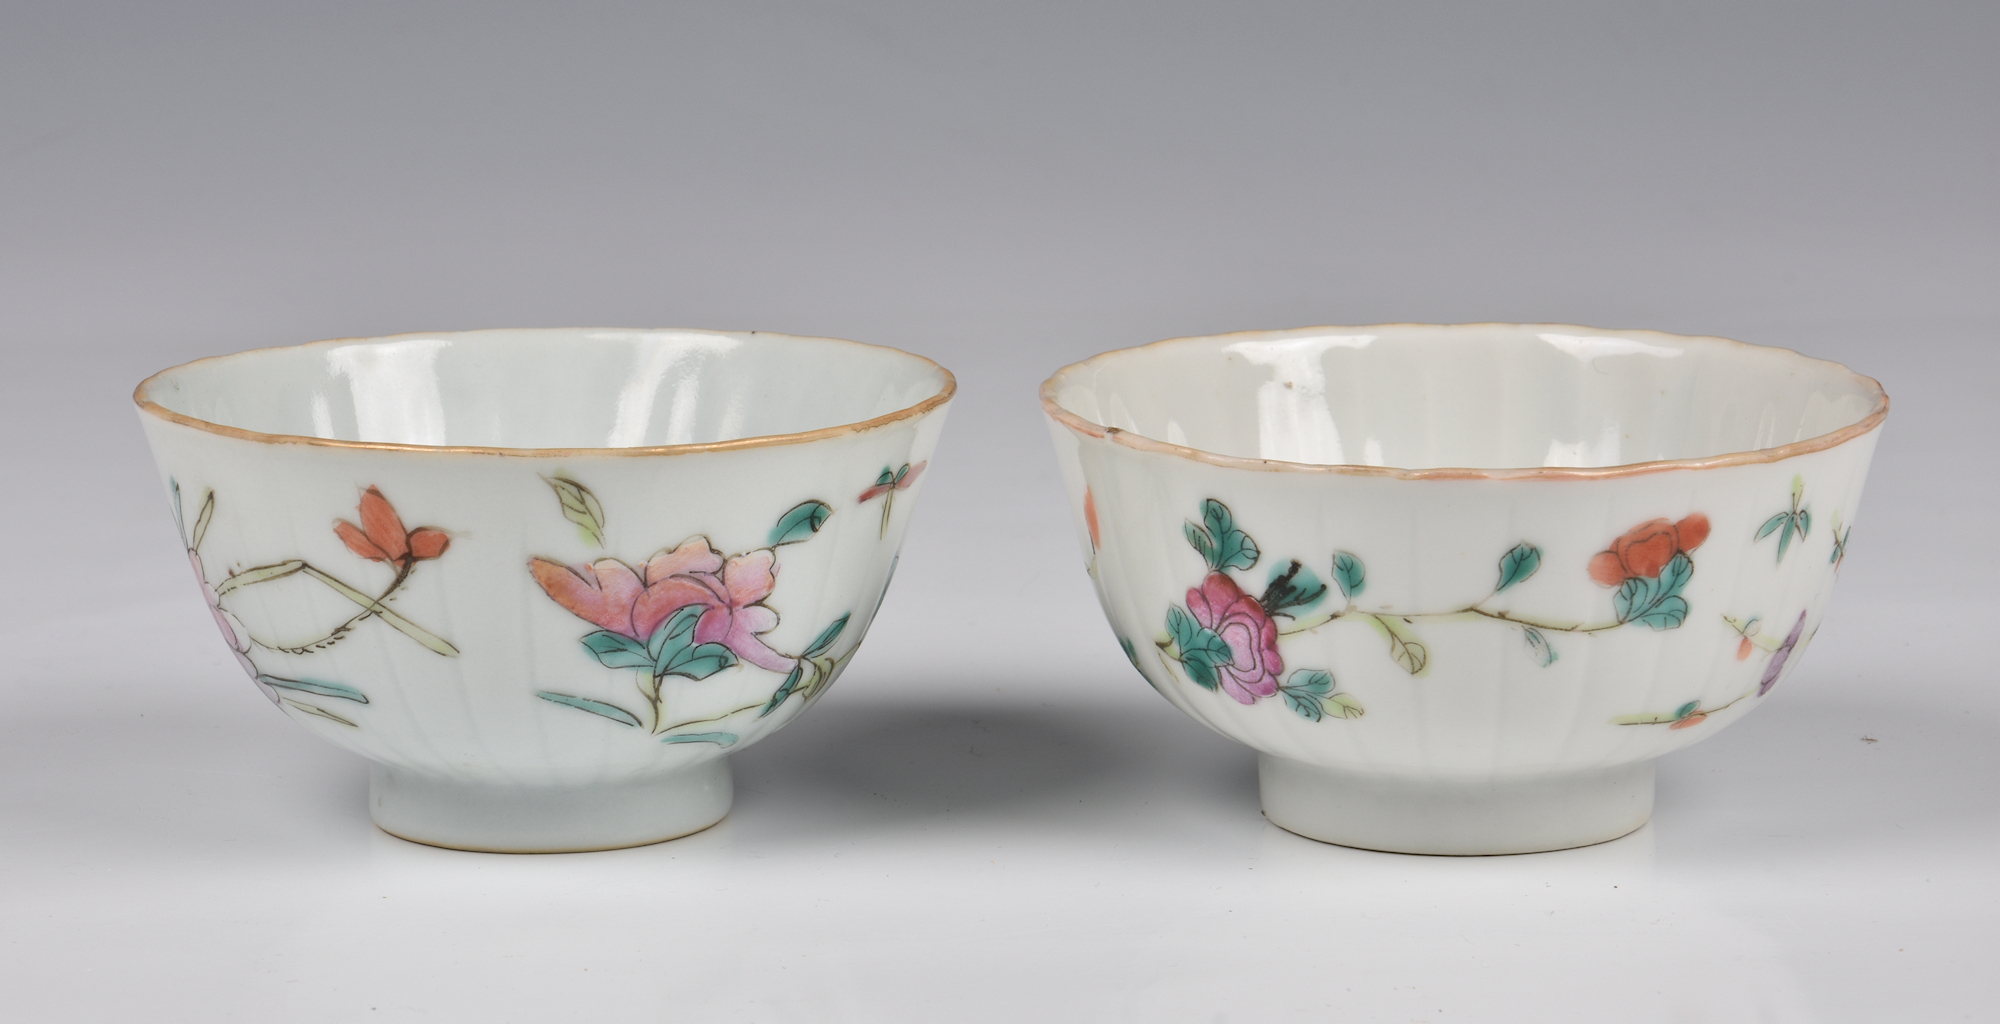 Five Chinese famille rose small bowls, 19th / early 20th century, including a matched pair of - Image 18 of 19